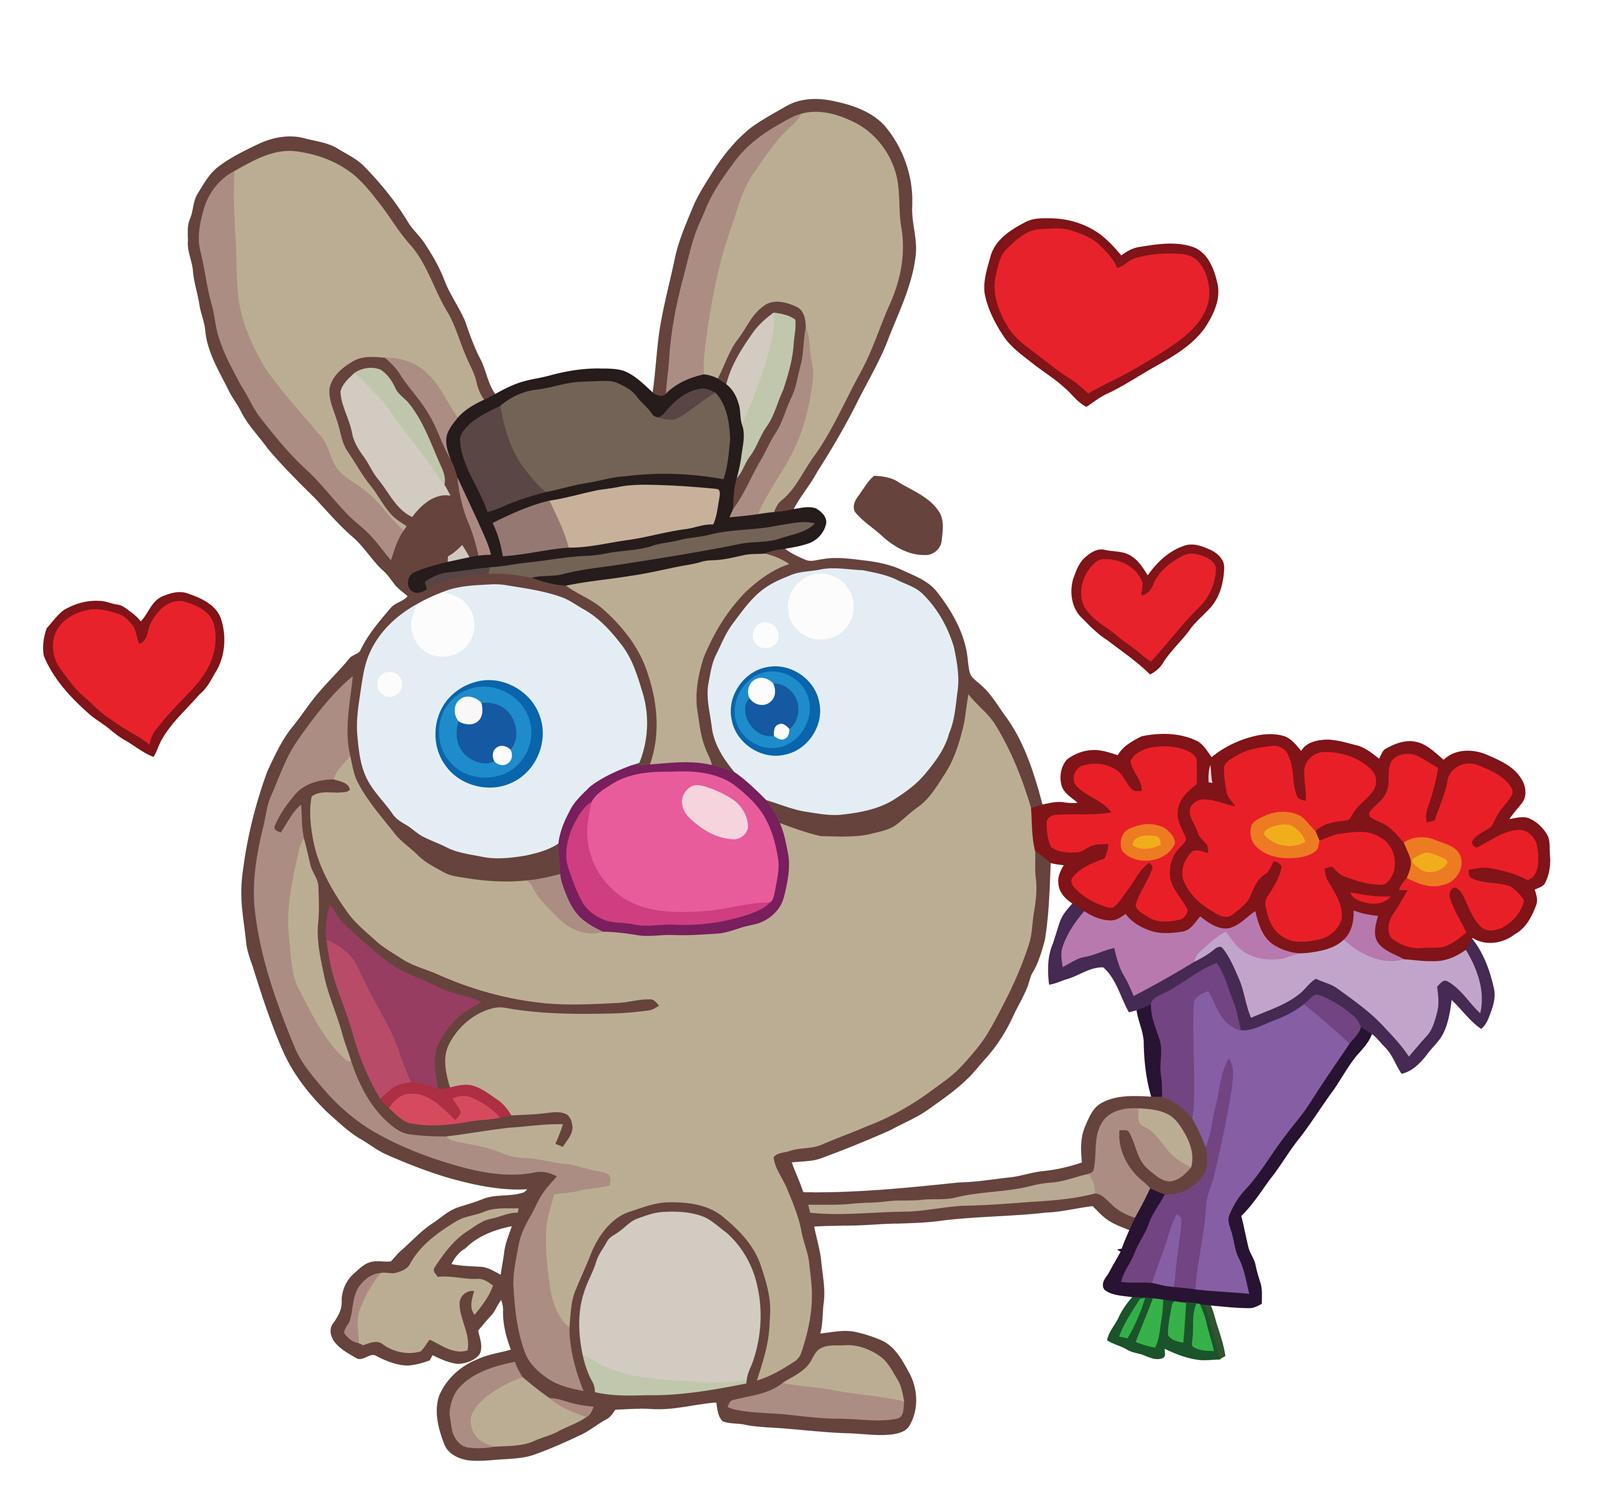 Free Valentine Cartoon Image, Download Free Clip Art, Free Clip Art on Clipart Library